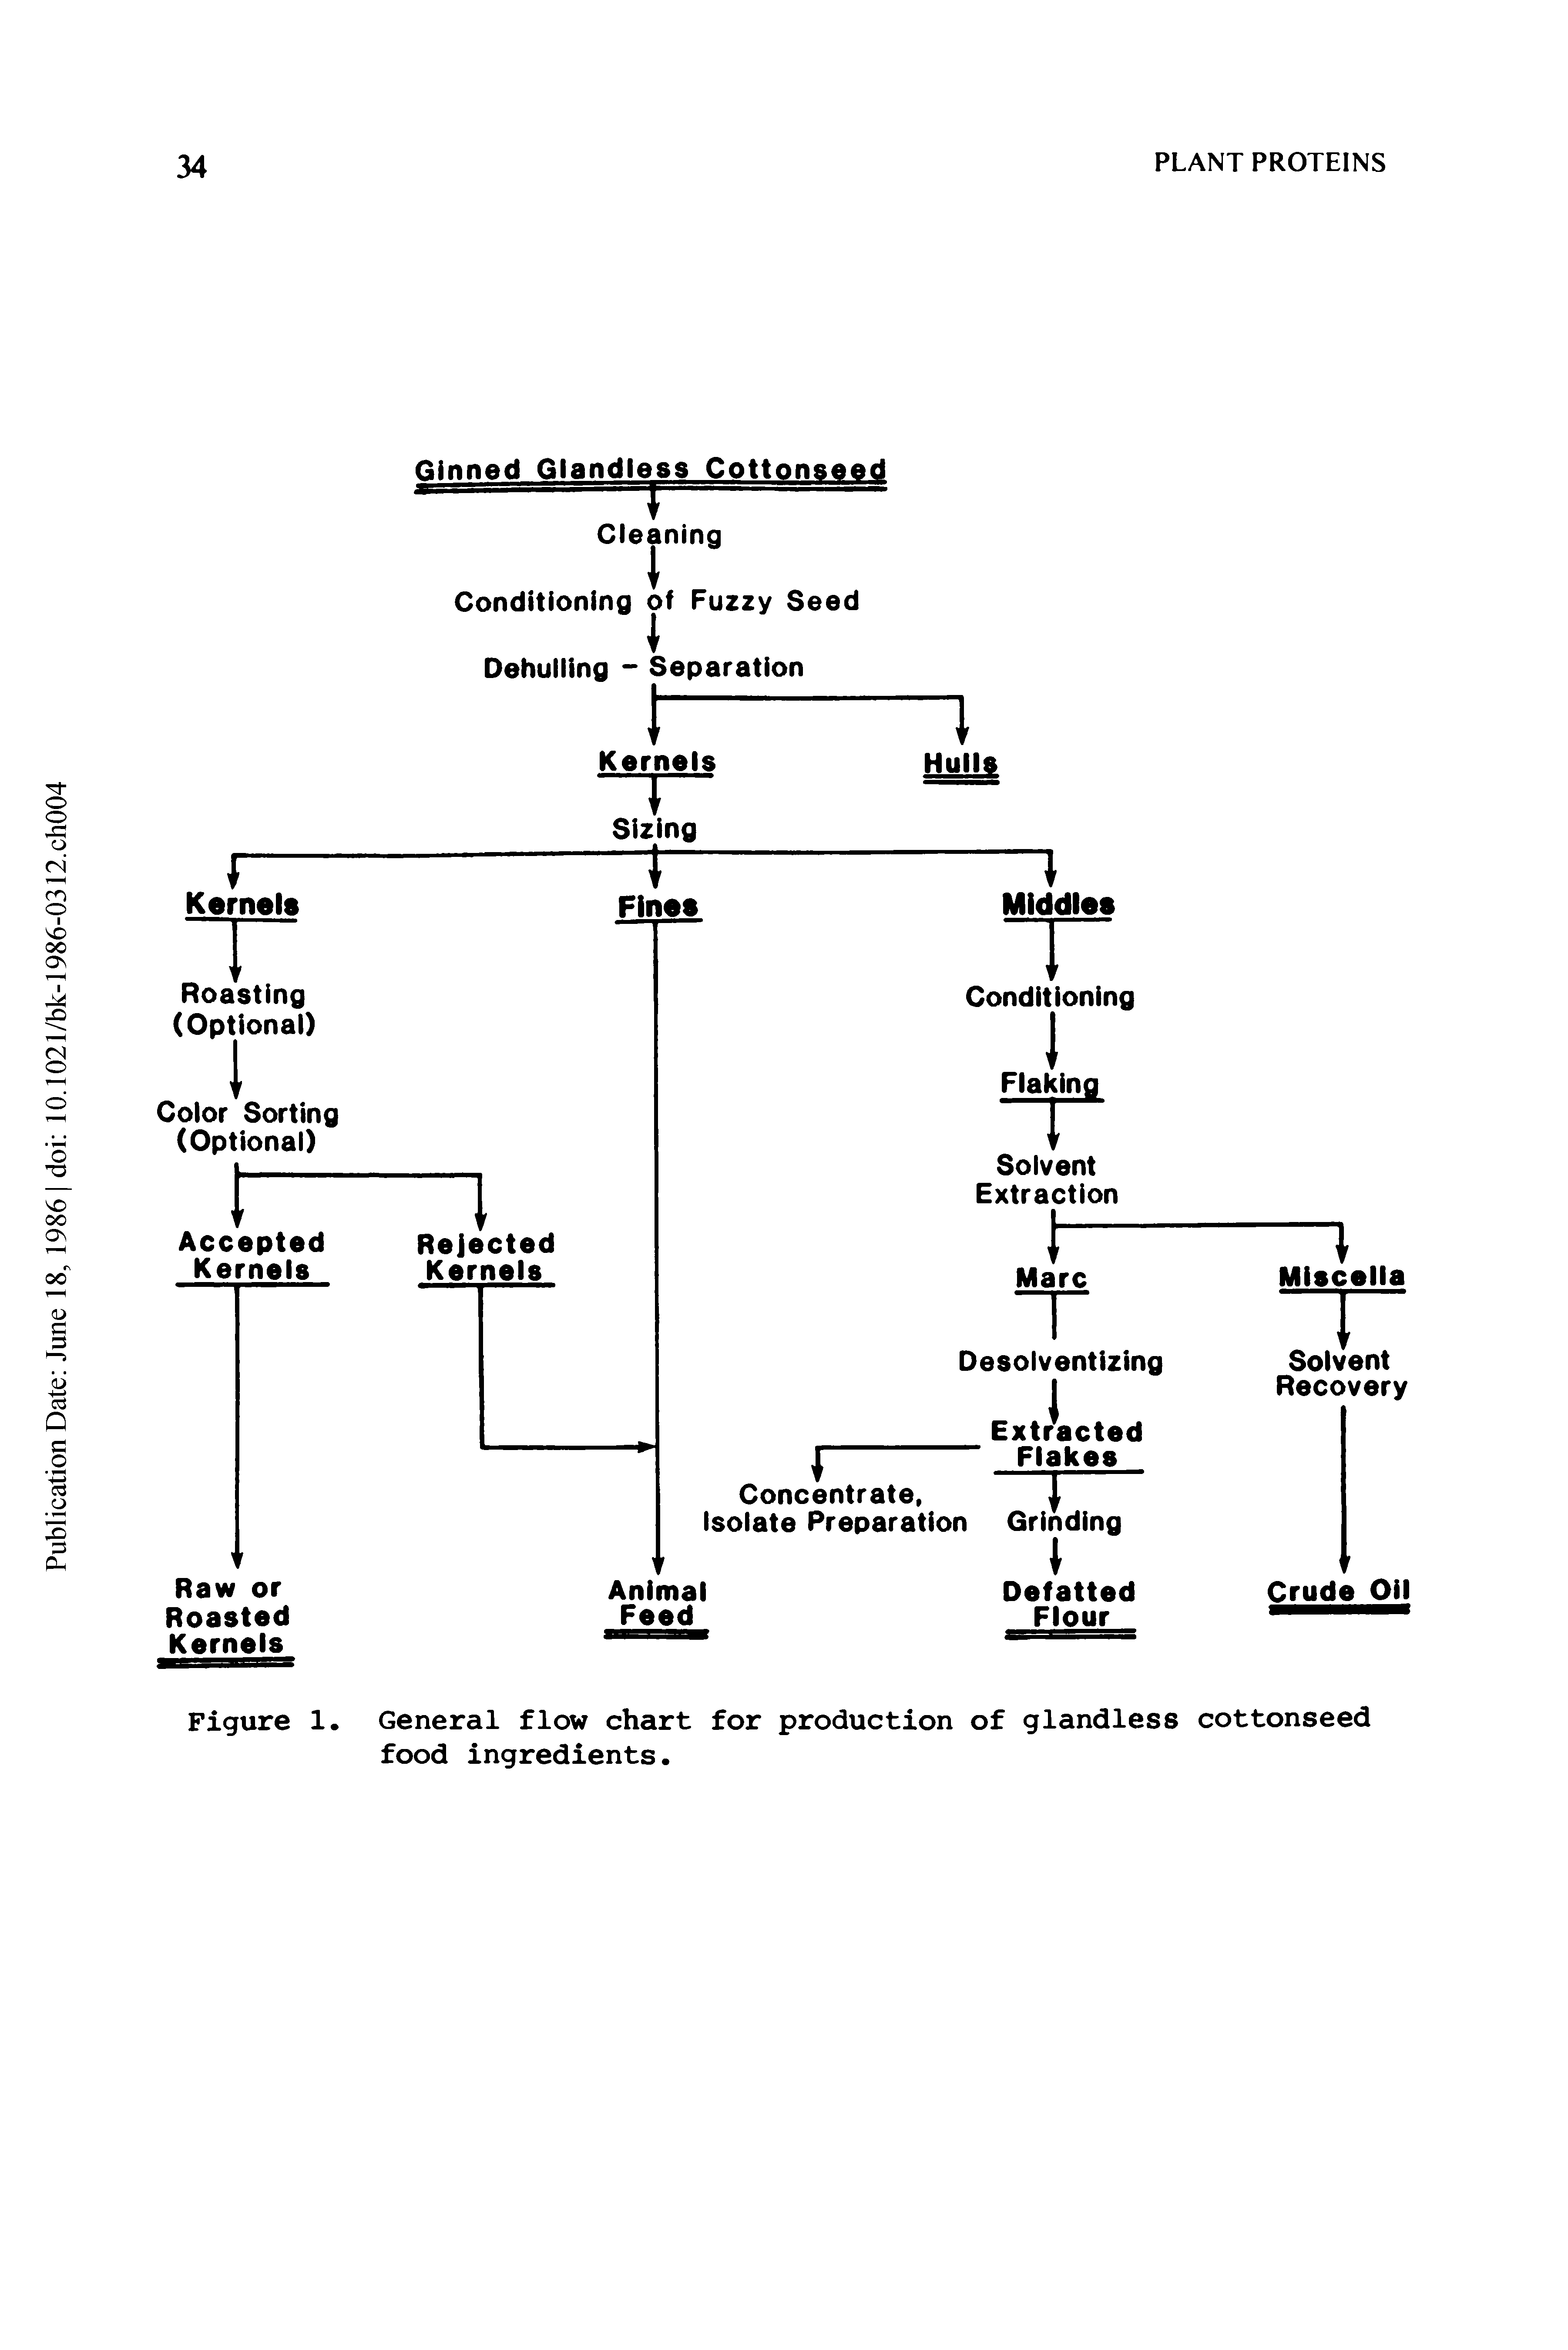 Figure 1. General flow chart for production of glandless cottonseed food ingredients.